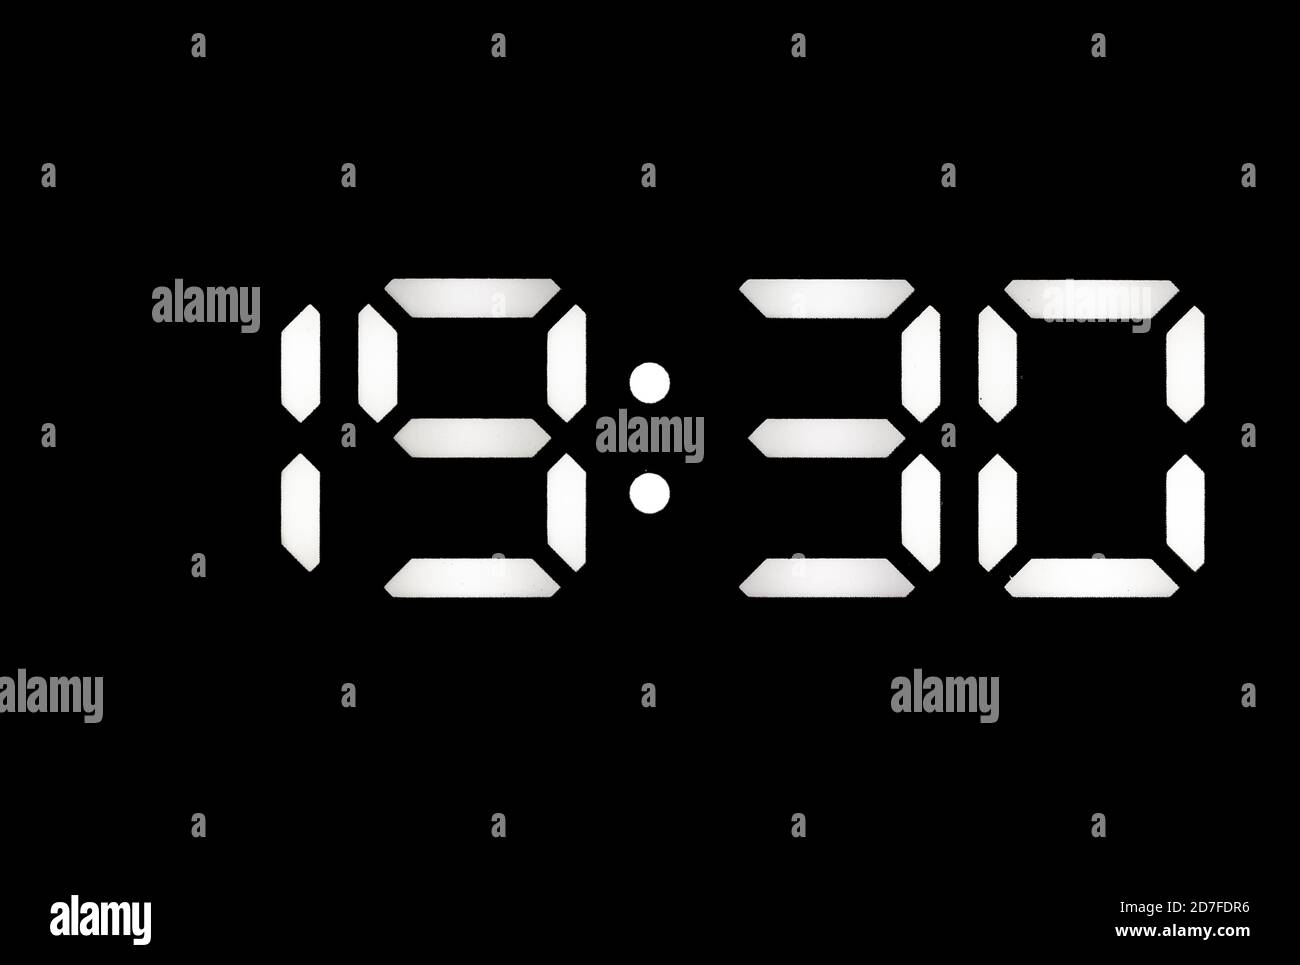 Real white led digital clock on a black background showing time 19:30 Stock Photo